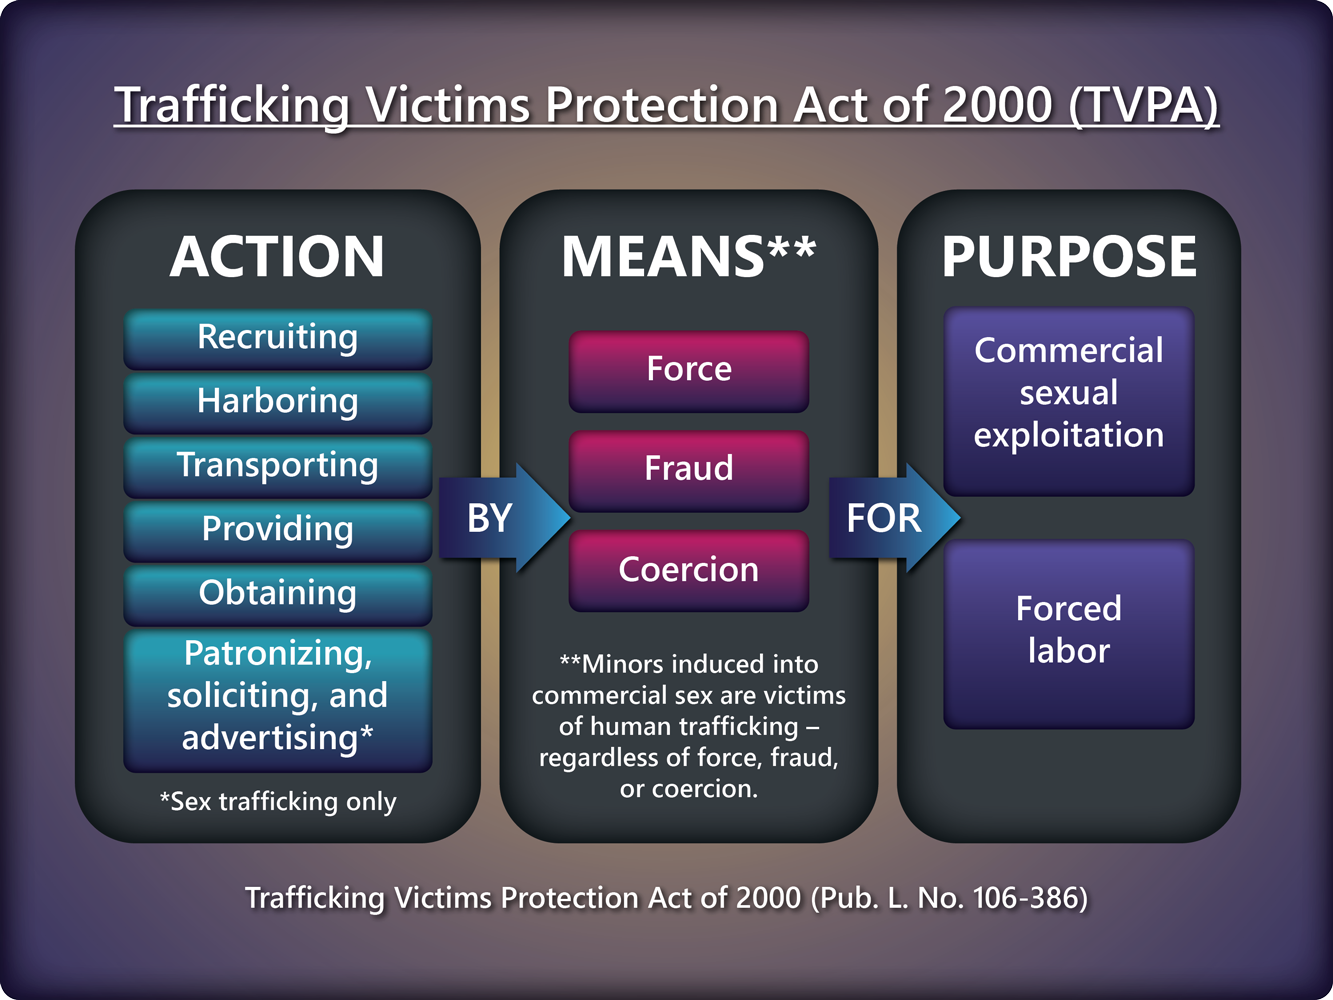 Trafficking Victims Protection Act of 2000 (TVPA) chart